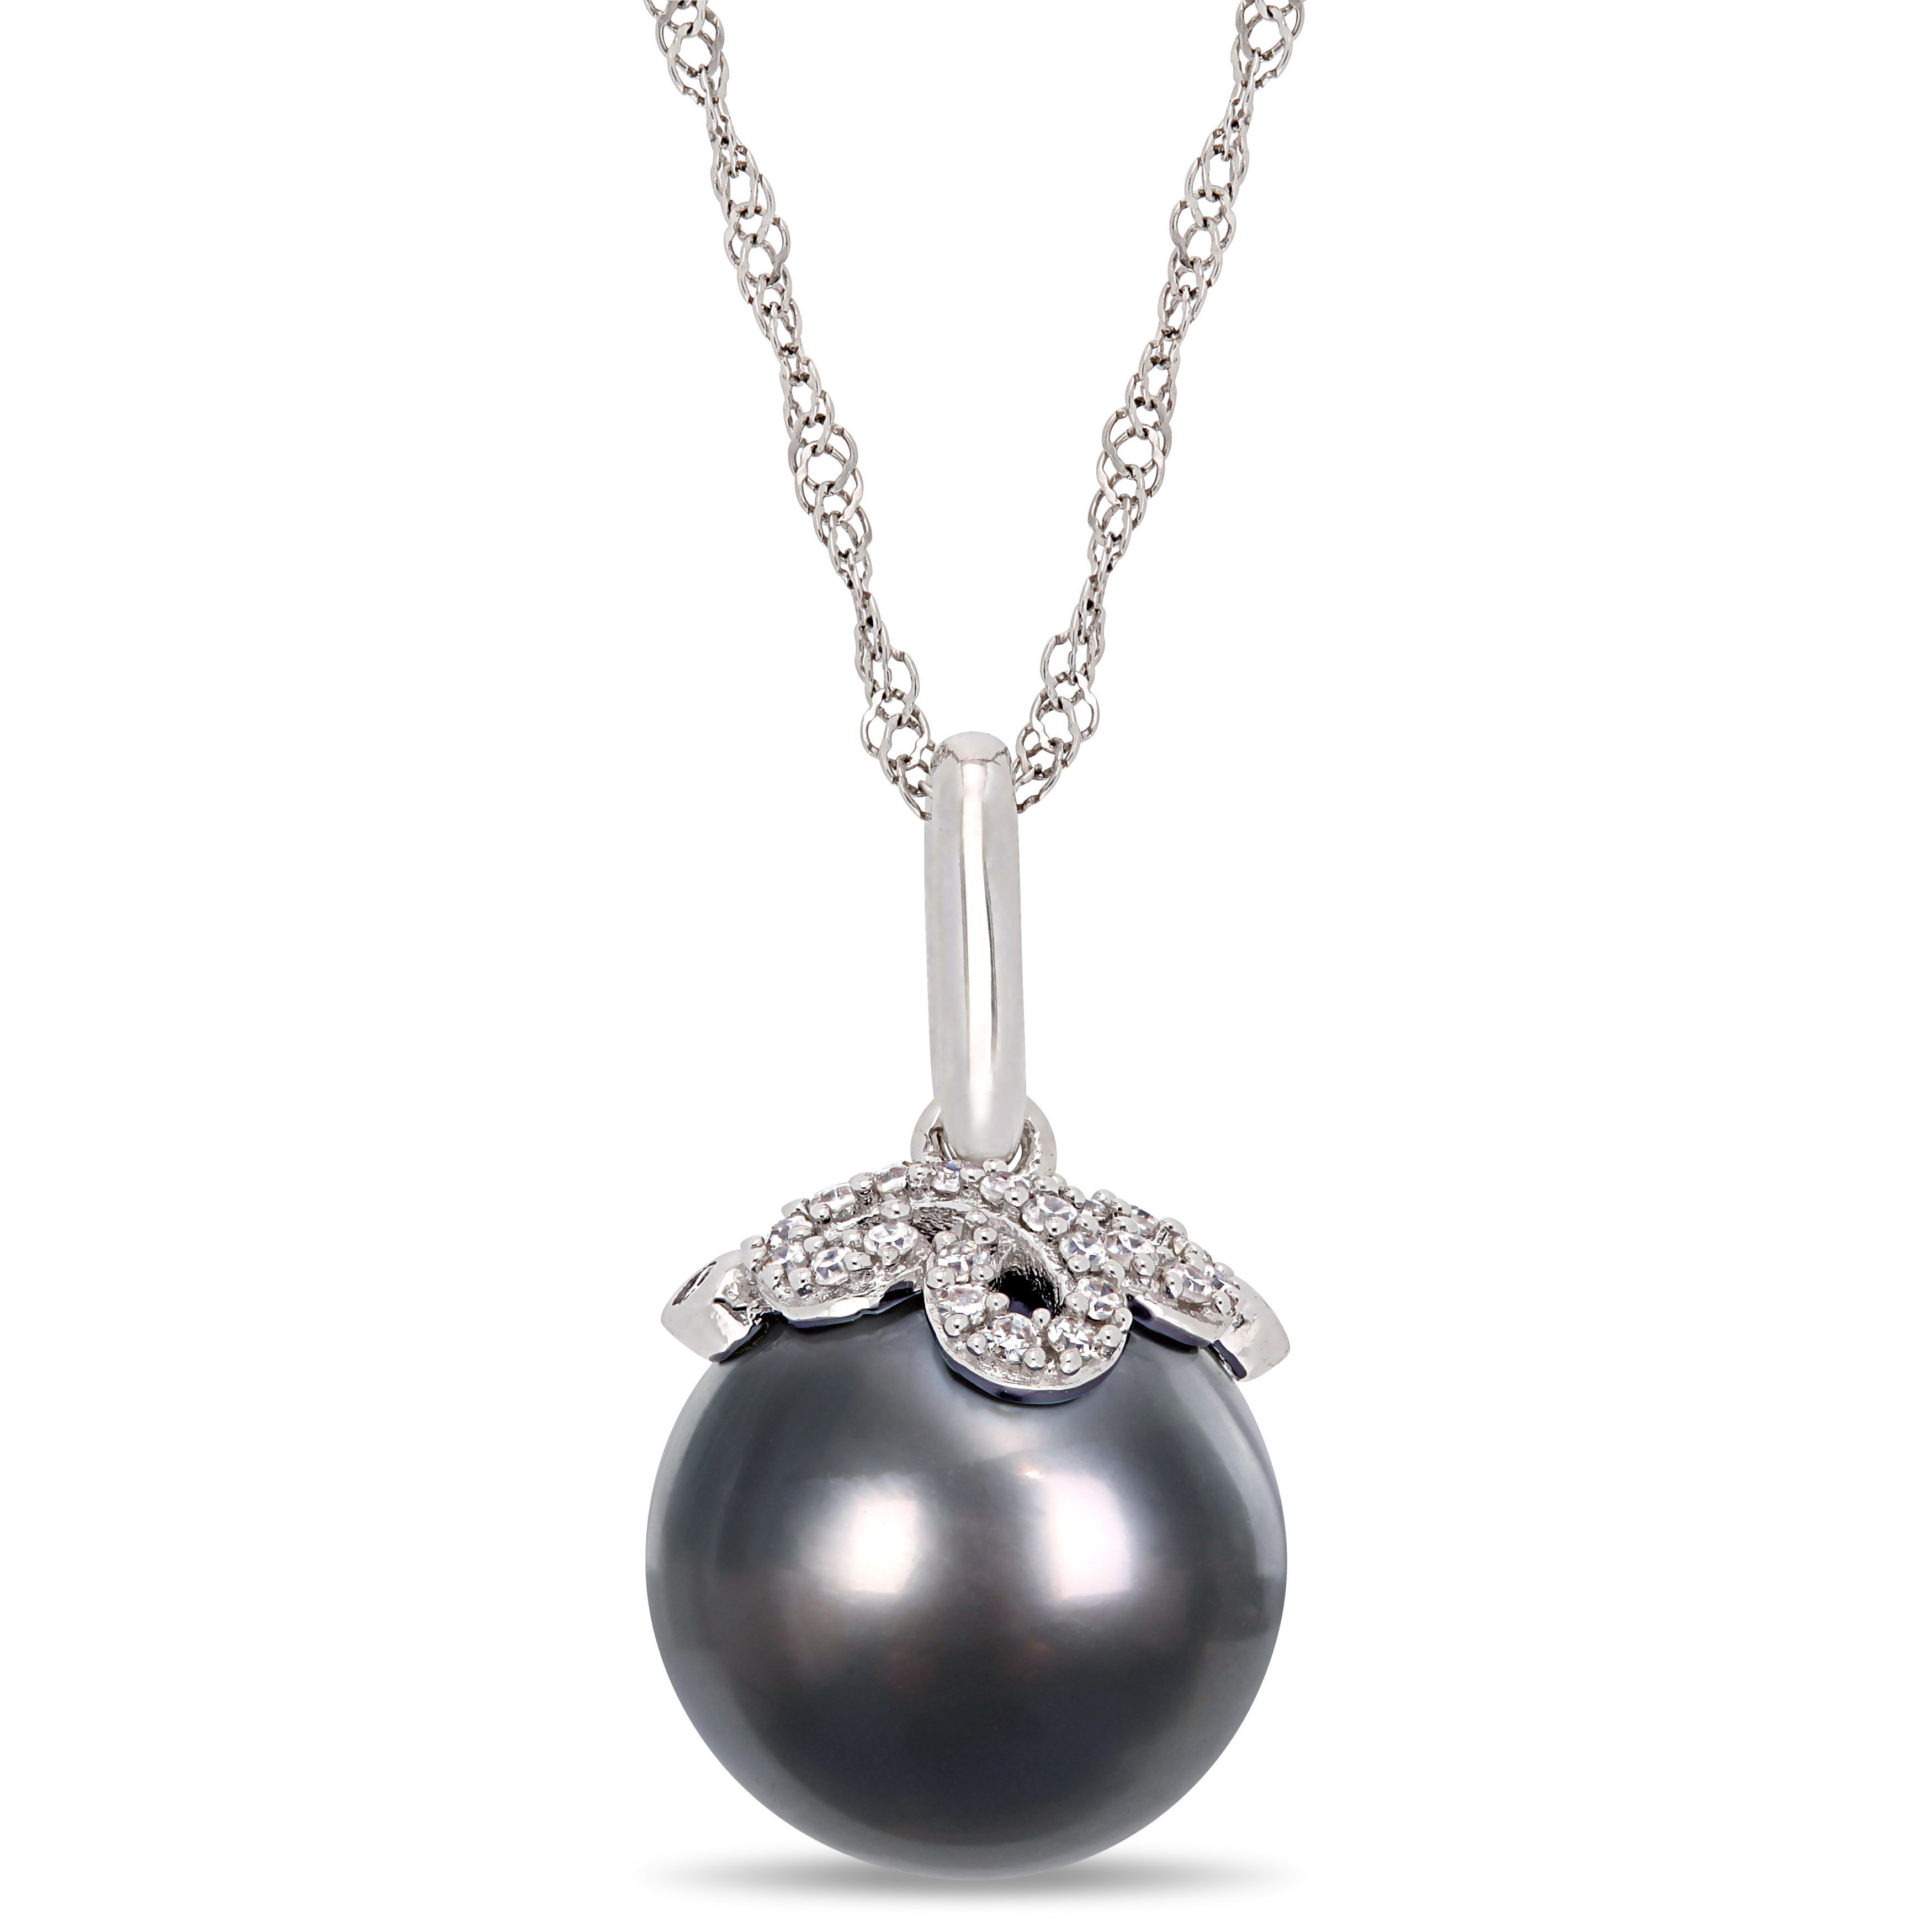 10-10.5 MM Black Tahitian Pearl and Diamond Accent Pendant with Chain in 14k White Gold